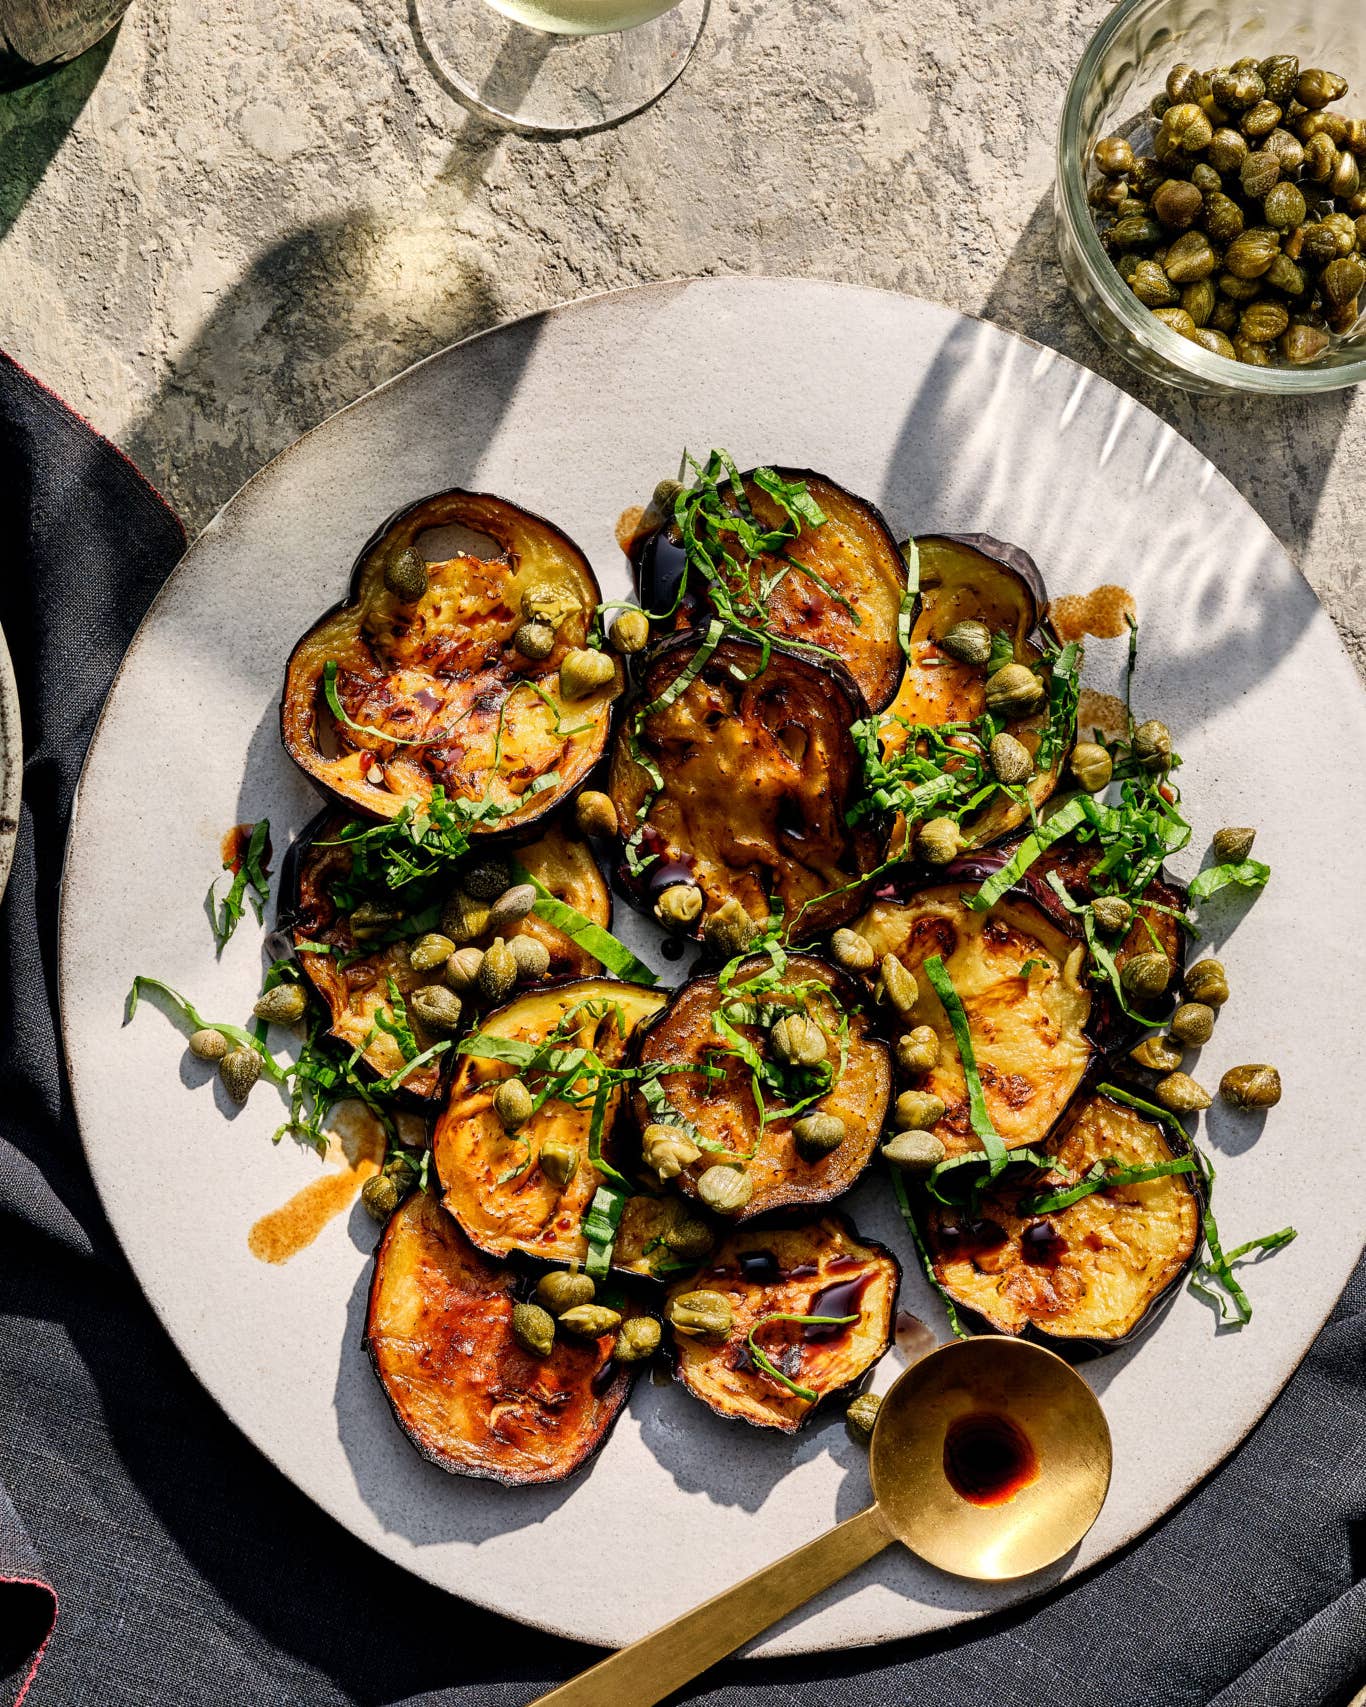 Pan-Fried Eggplant with Balsamic, Basil, and Capers